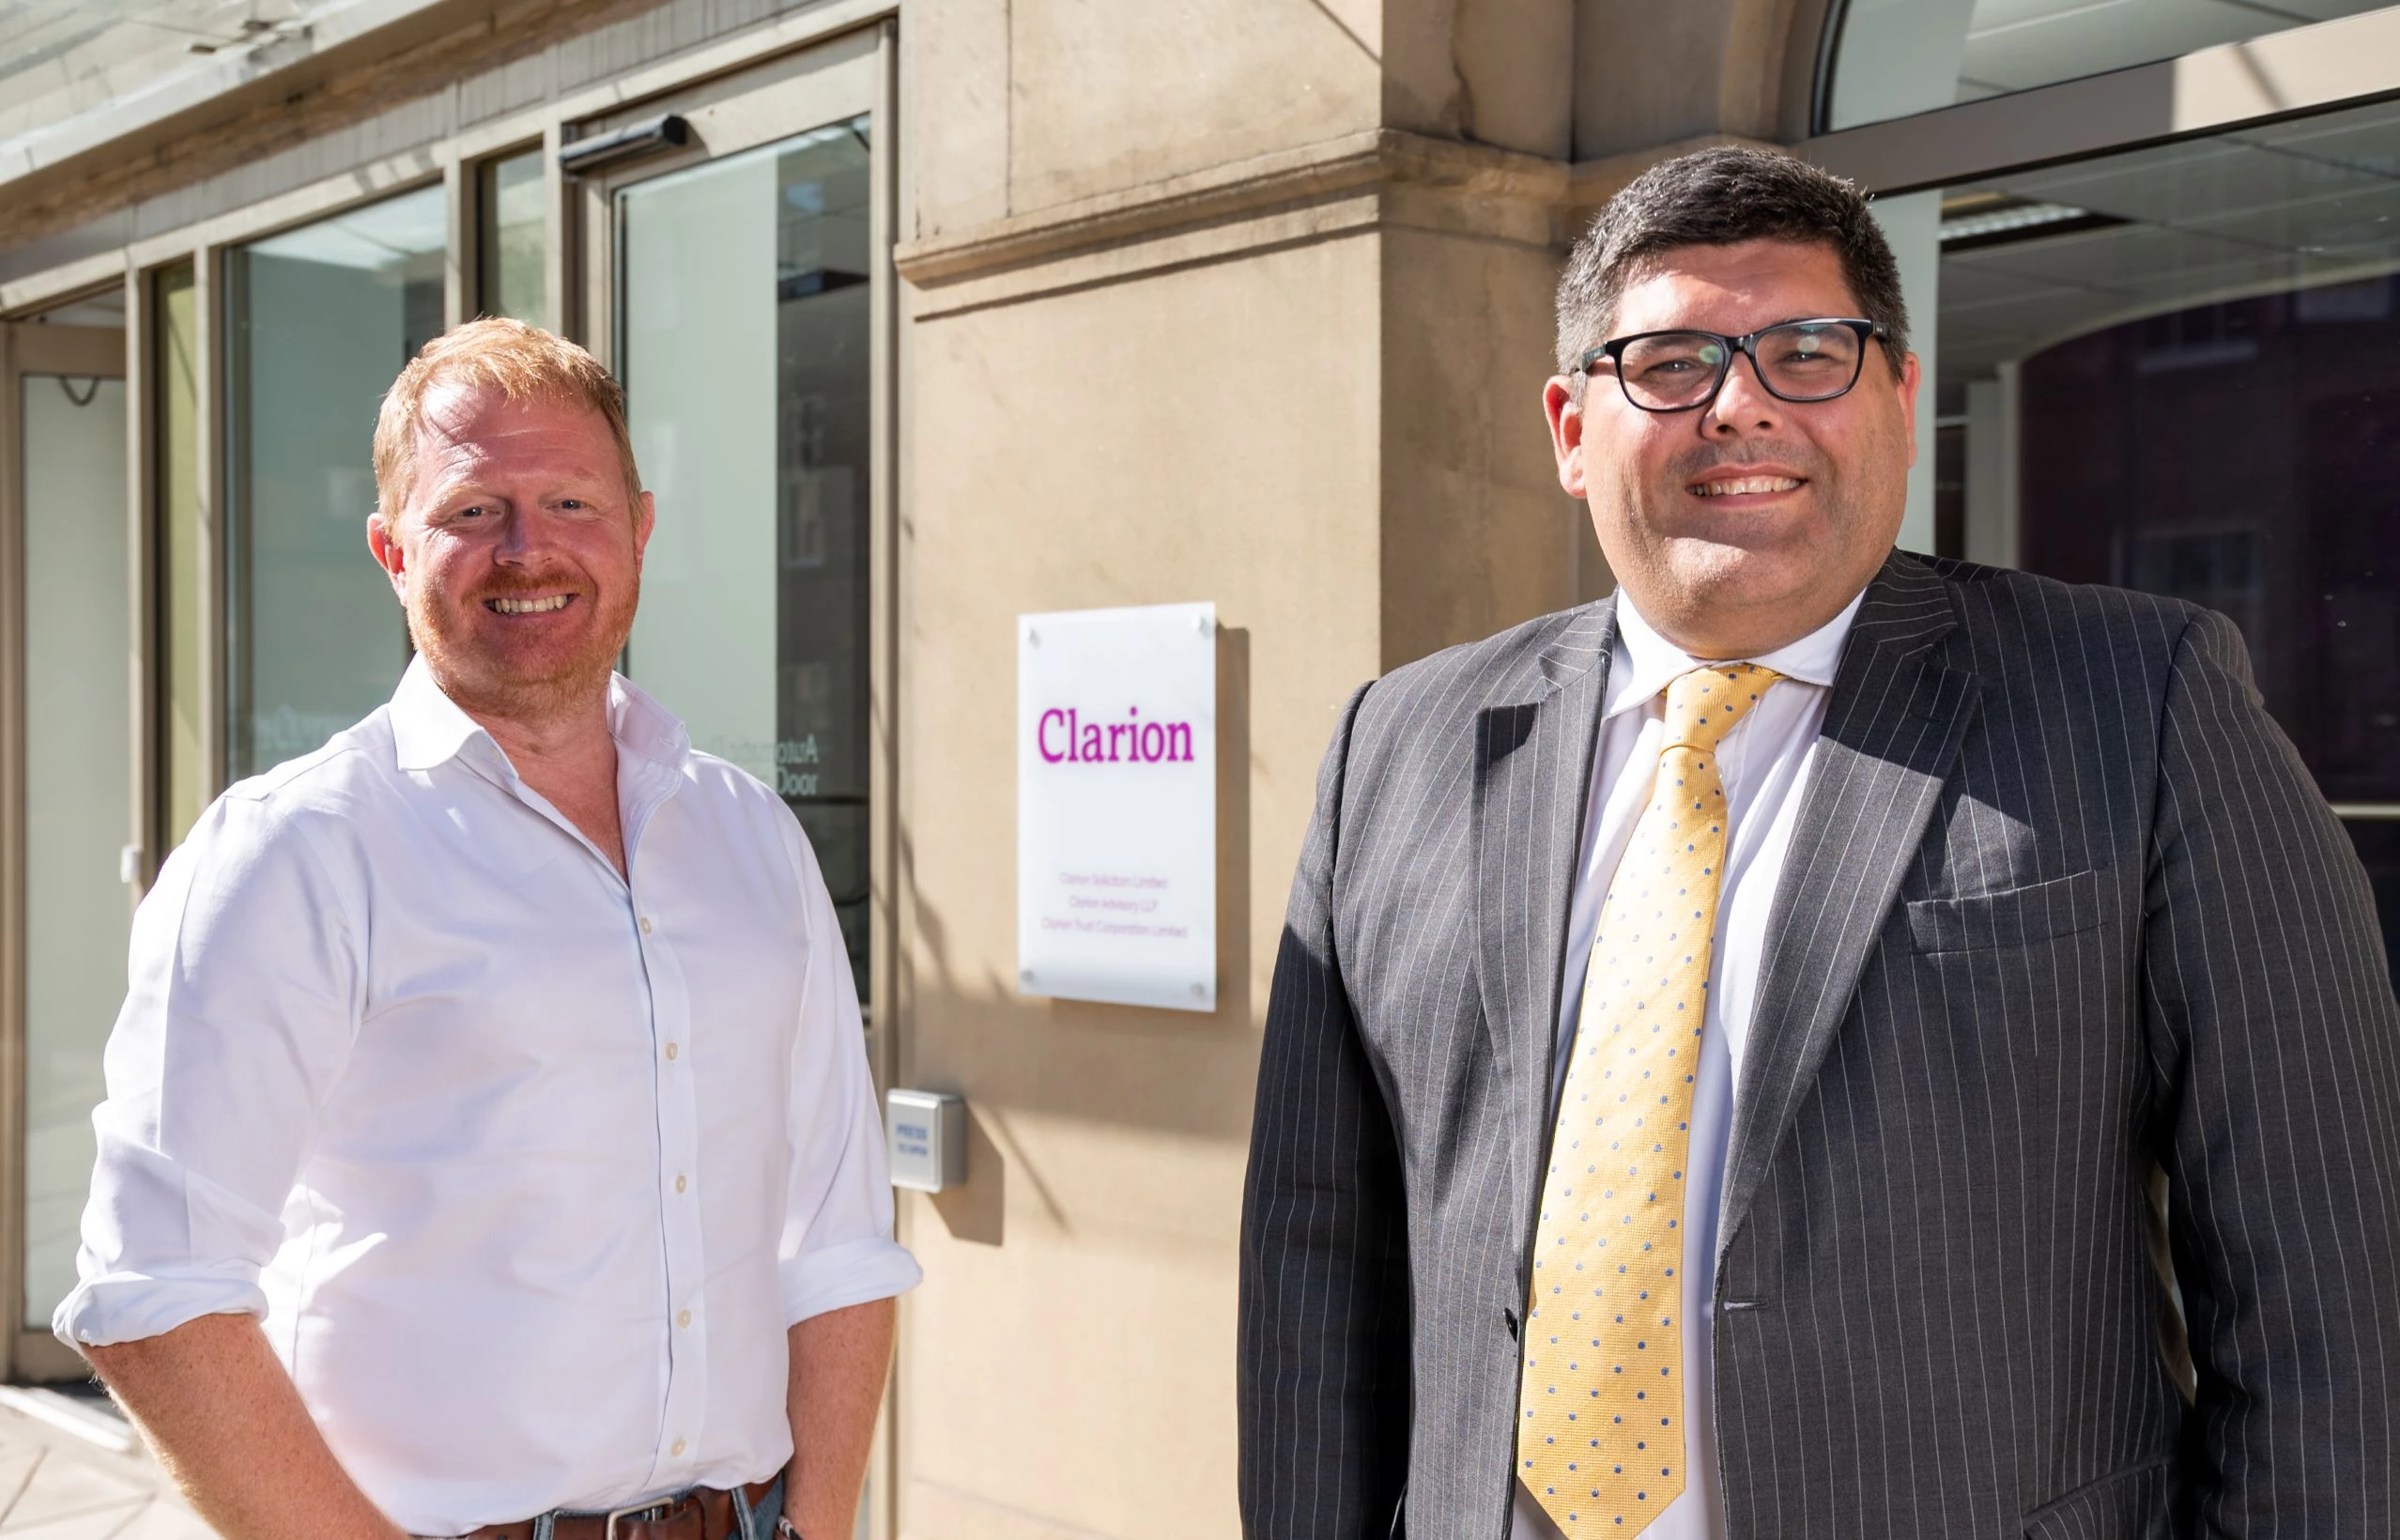 Picture shows (L to R): Martin Grange and Simon Mydlowski of Clarion’s real estate team